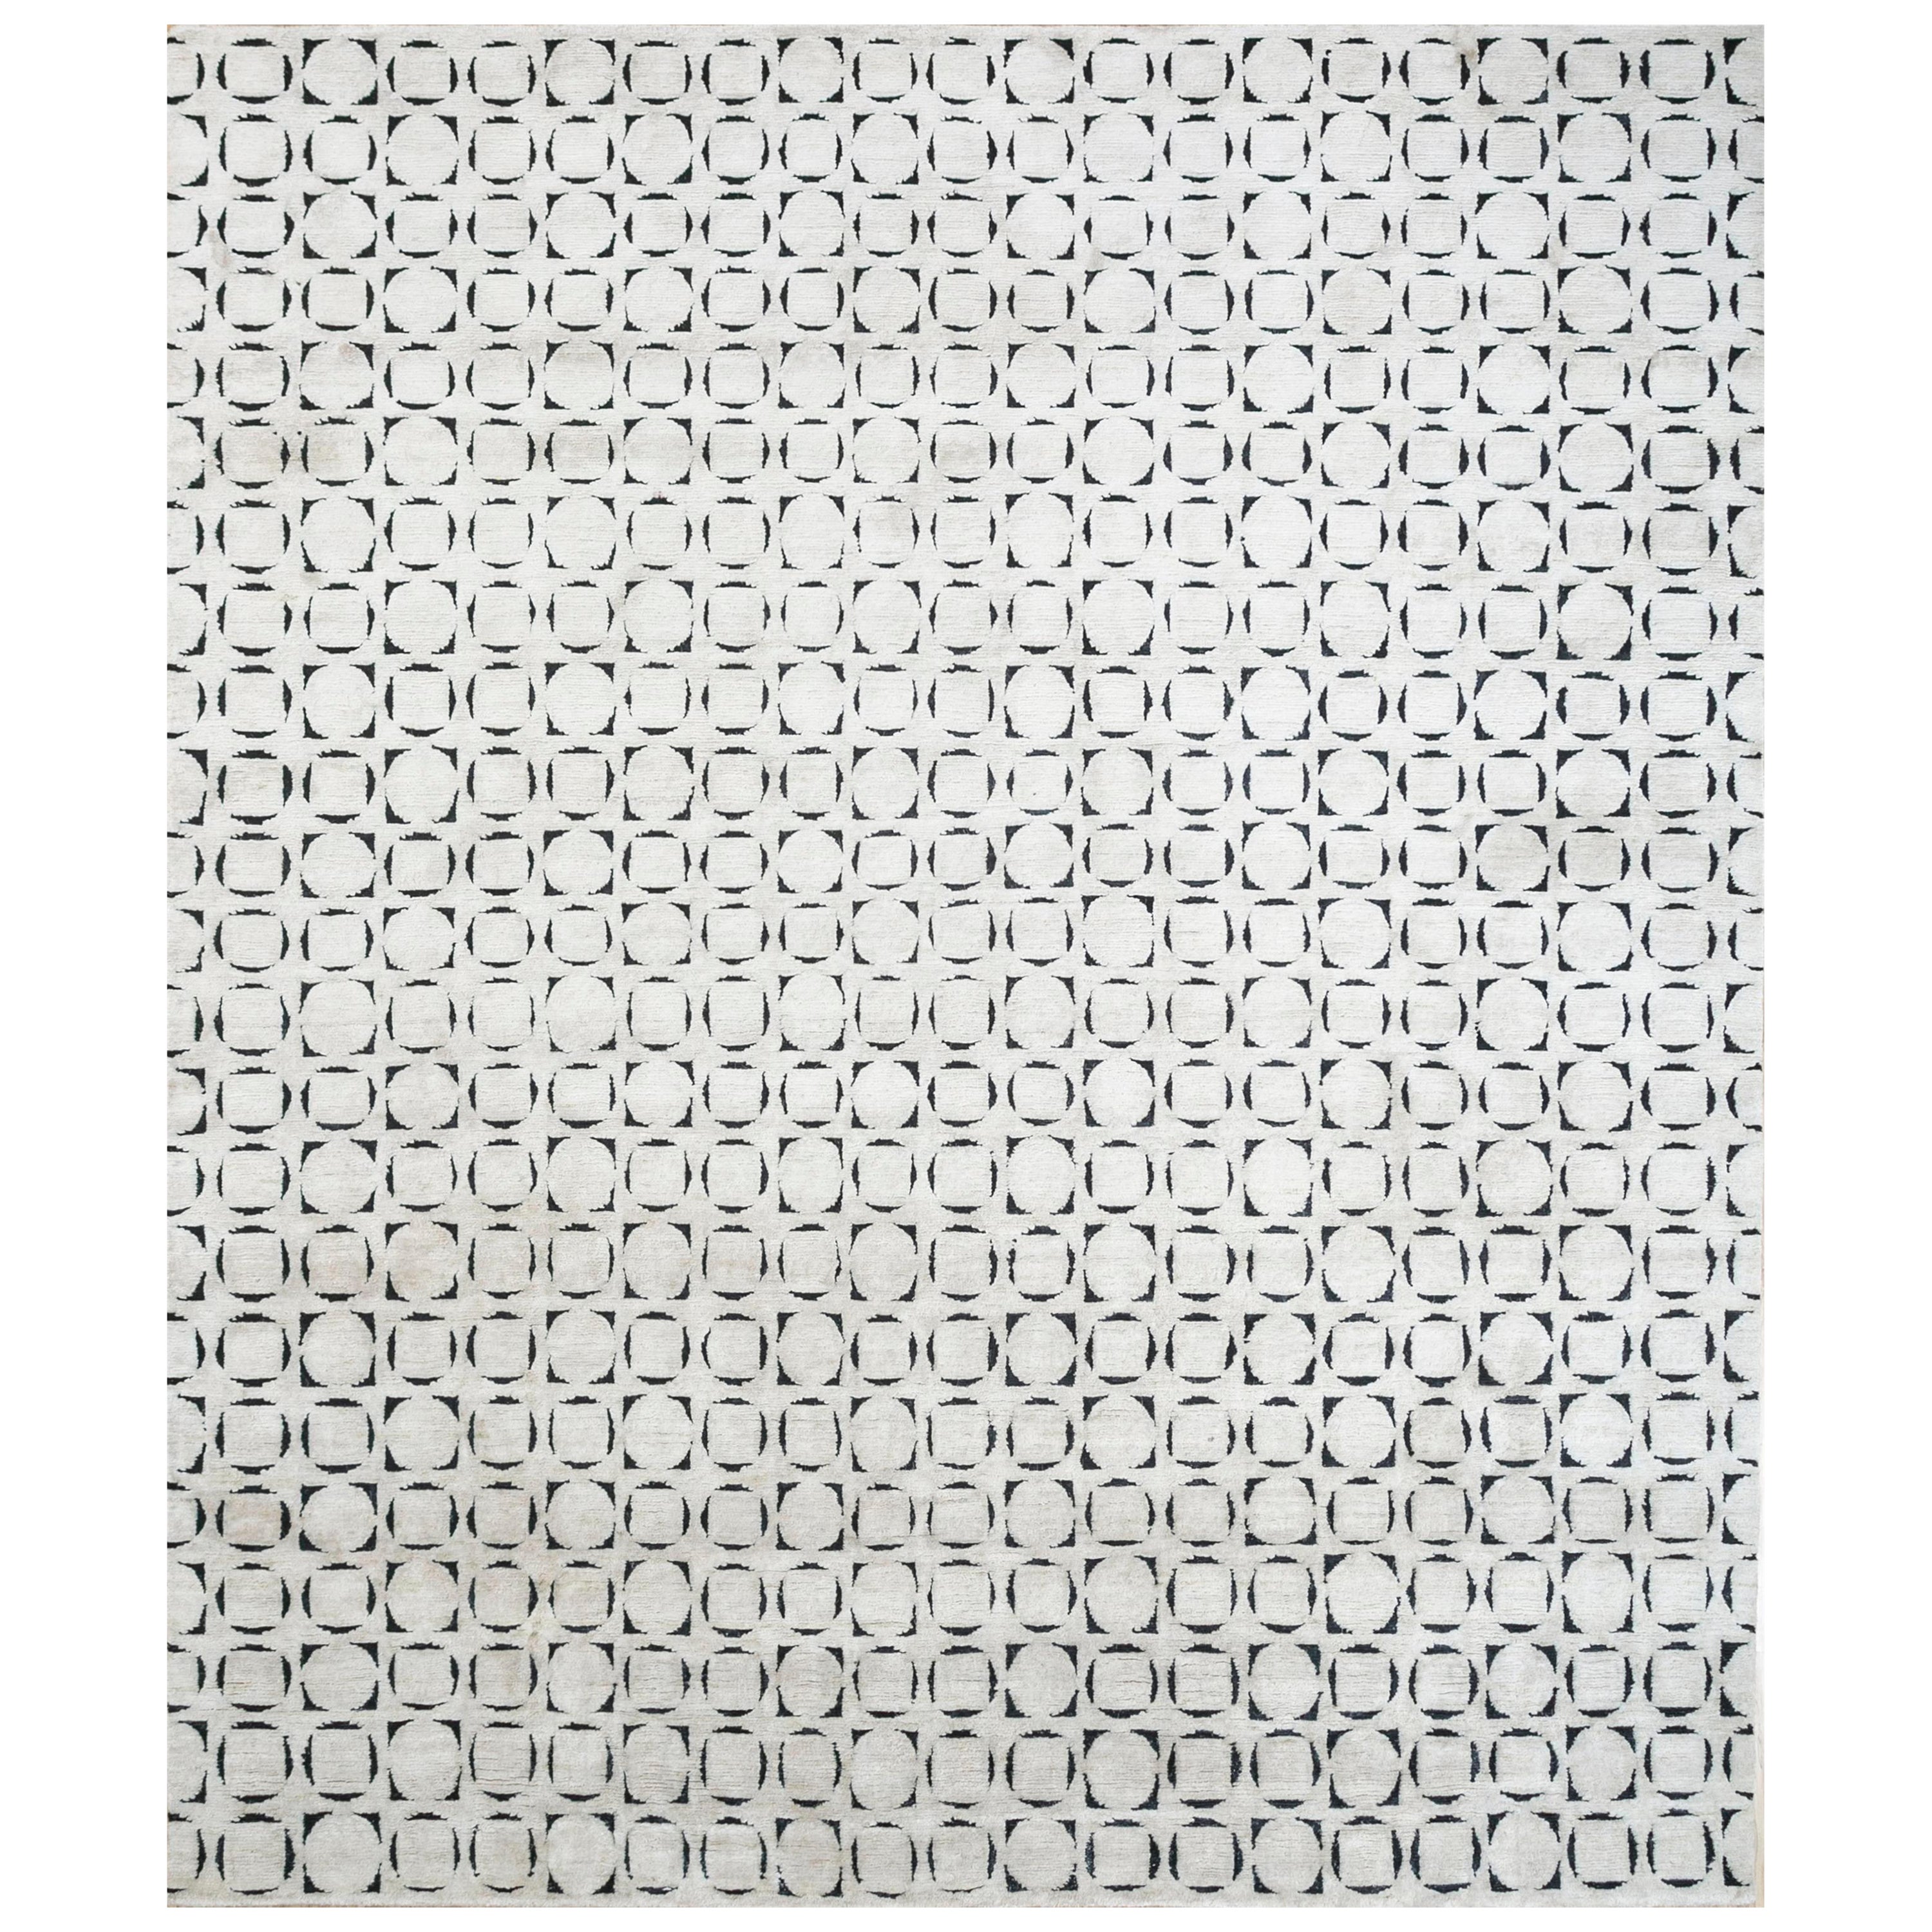 Tranquility Threads Antique White & Ebony 240X300 cm Handknotted Rug